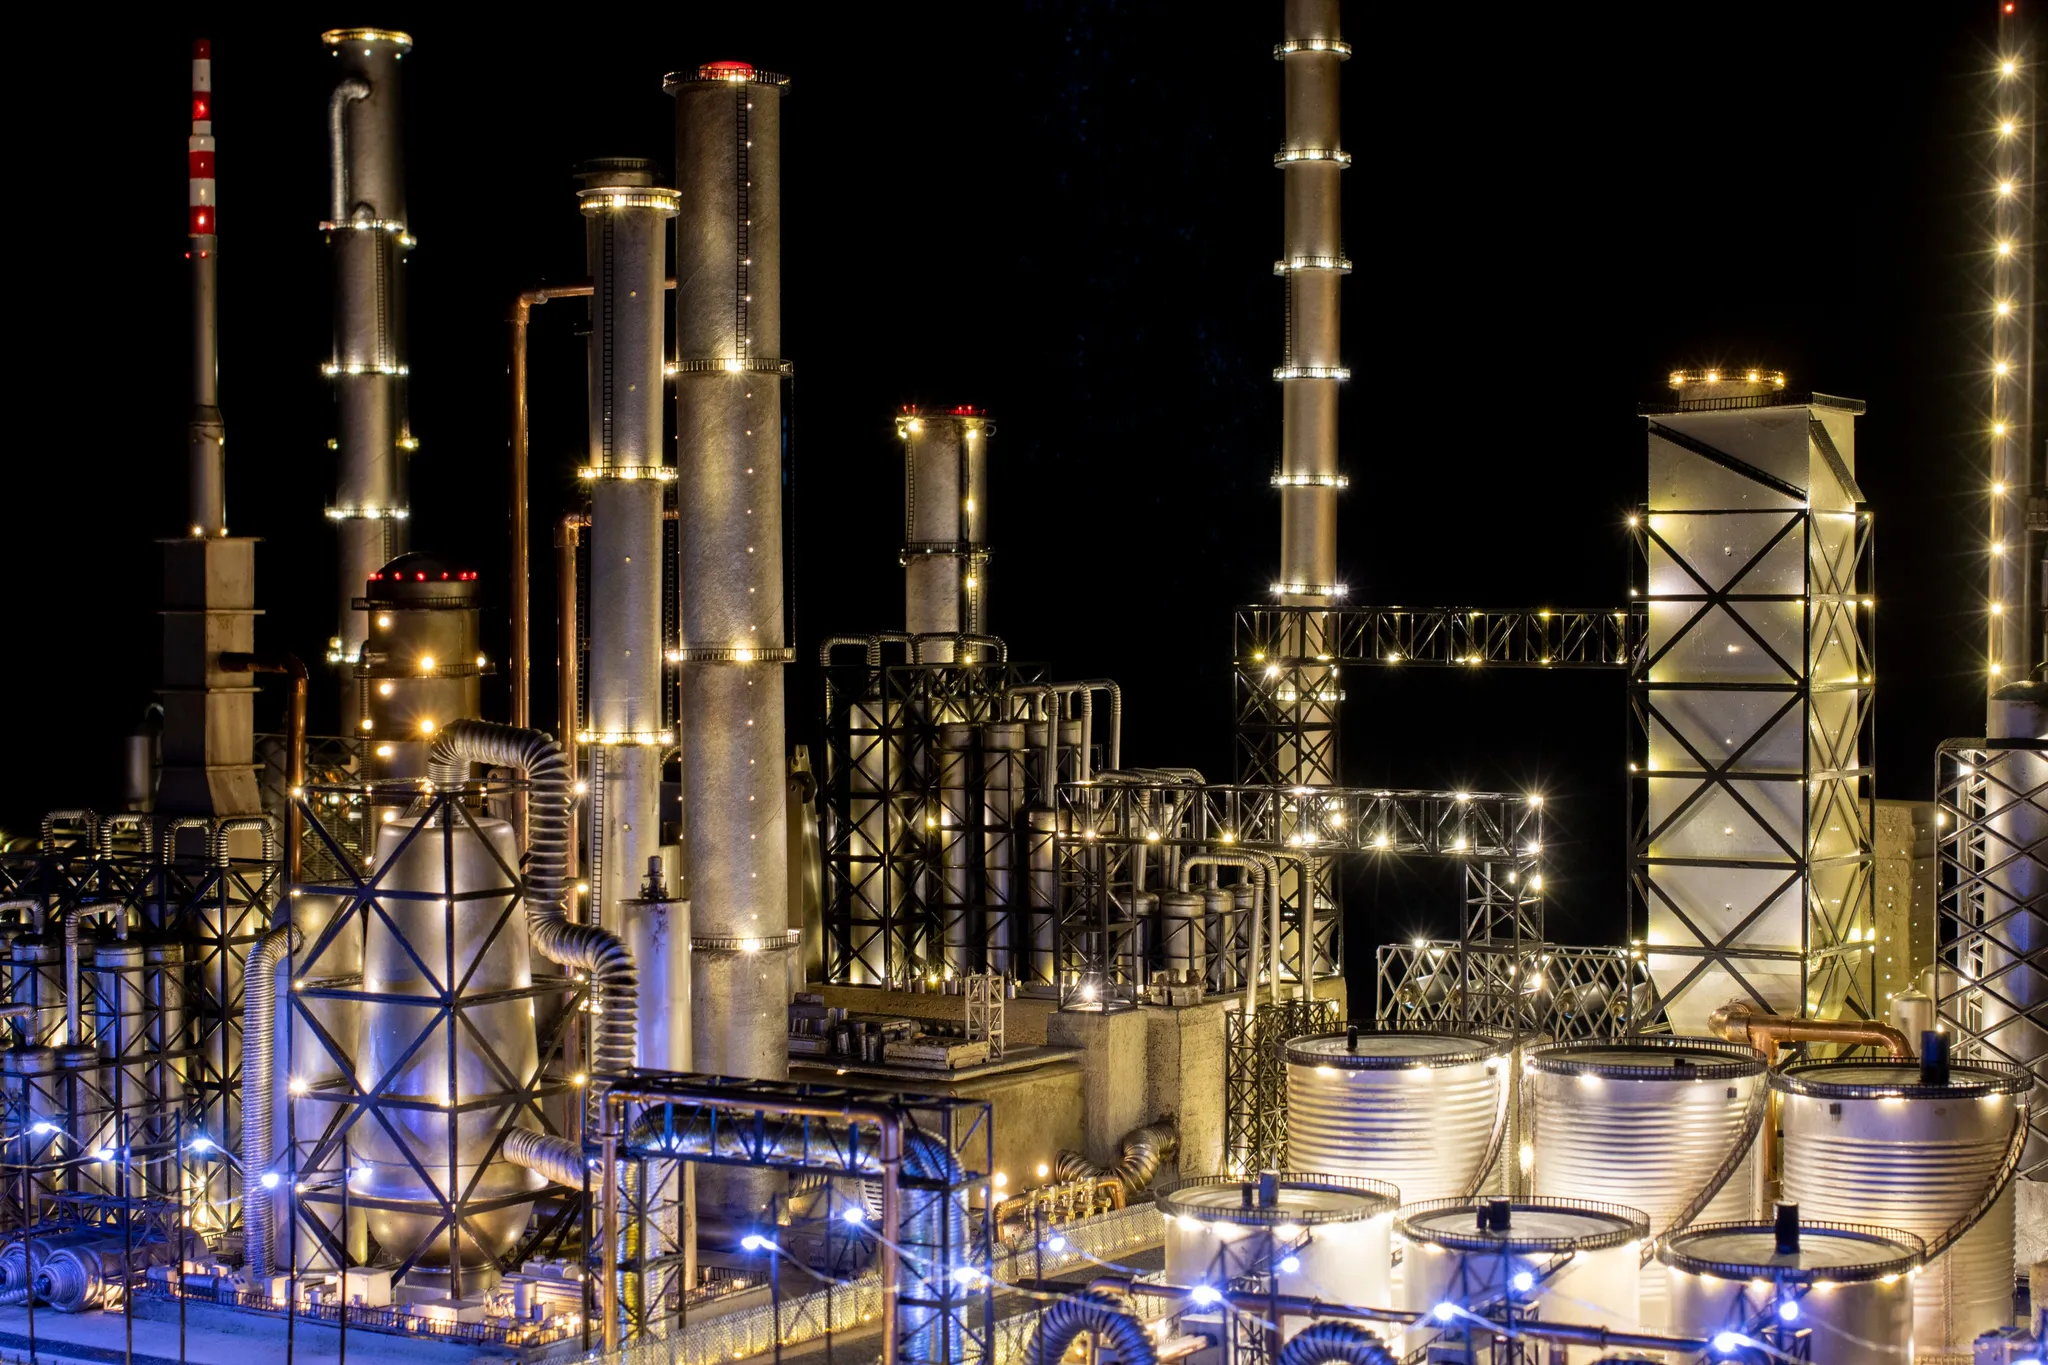 An oil refinery industrial zone illuminated at night, featuring brightly lit white towers and cylinders aglow in a captivating combination of white and blue lights.